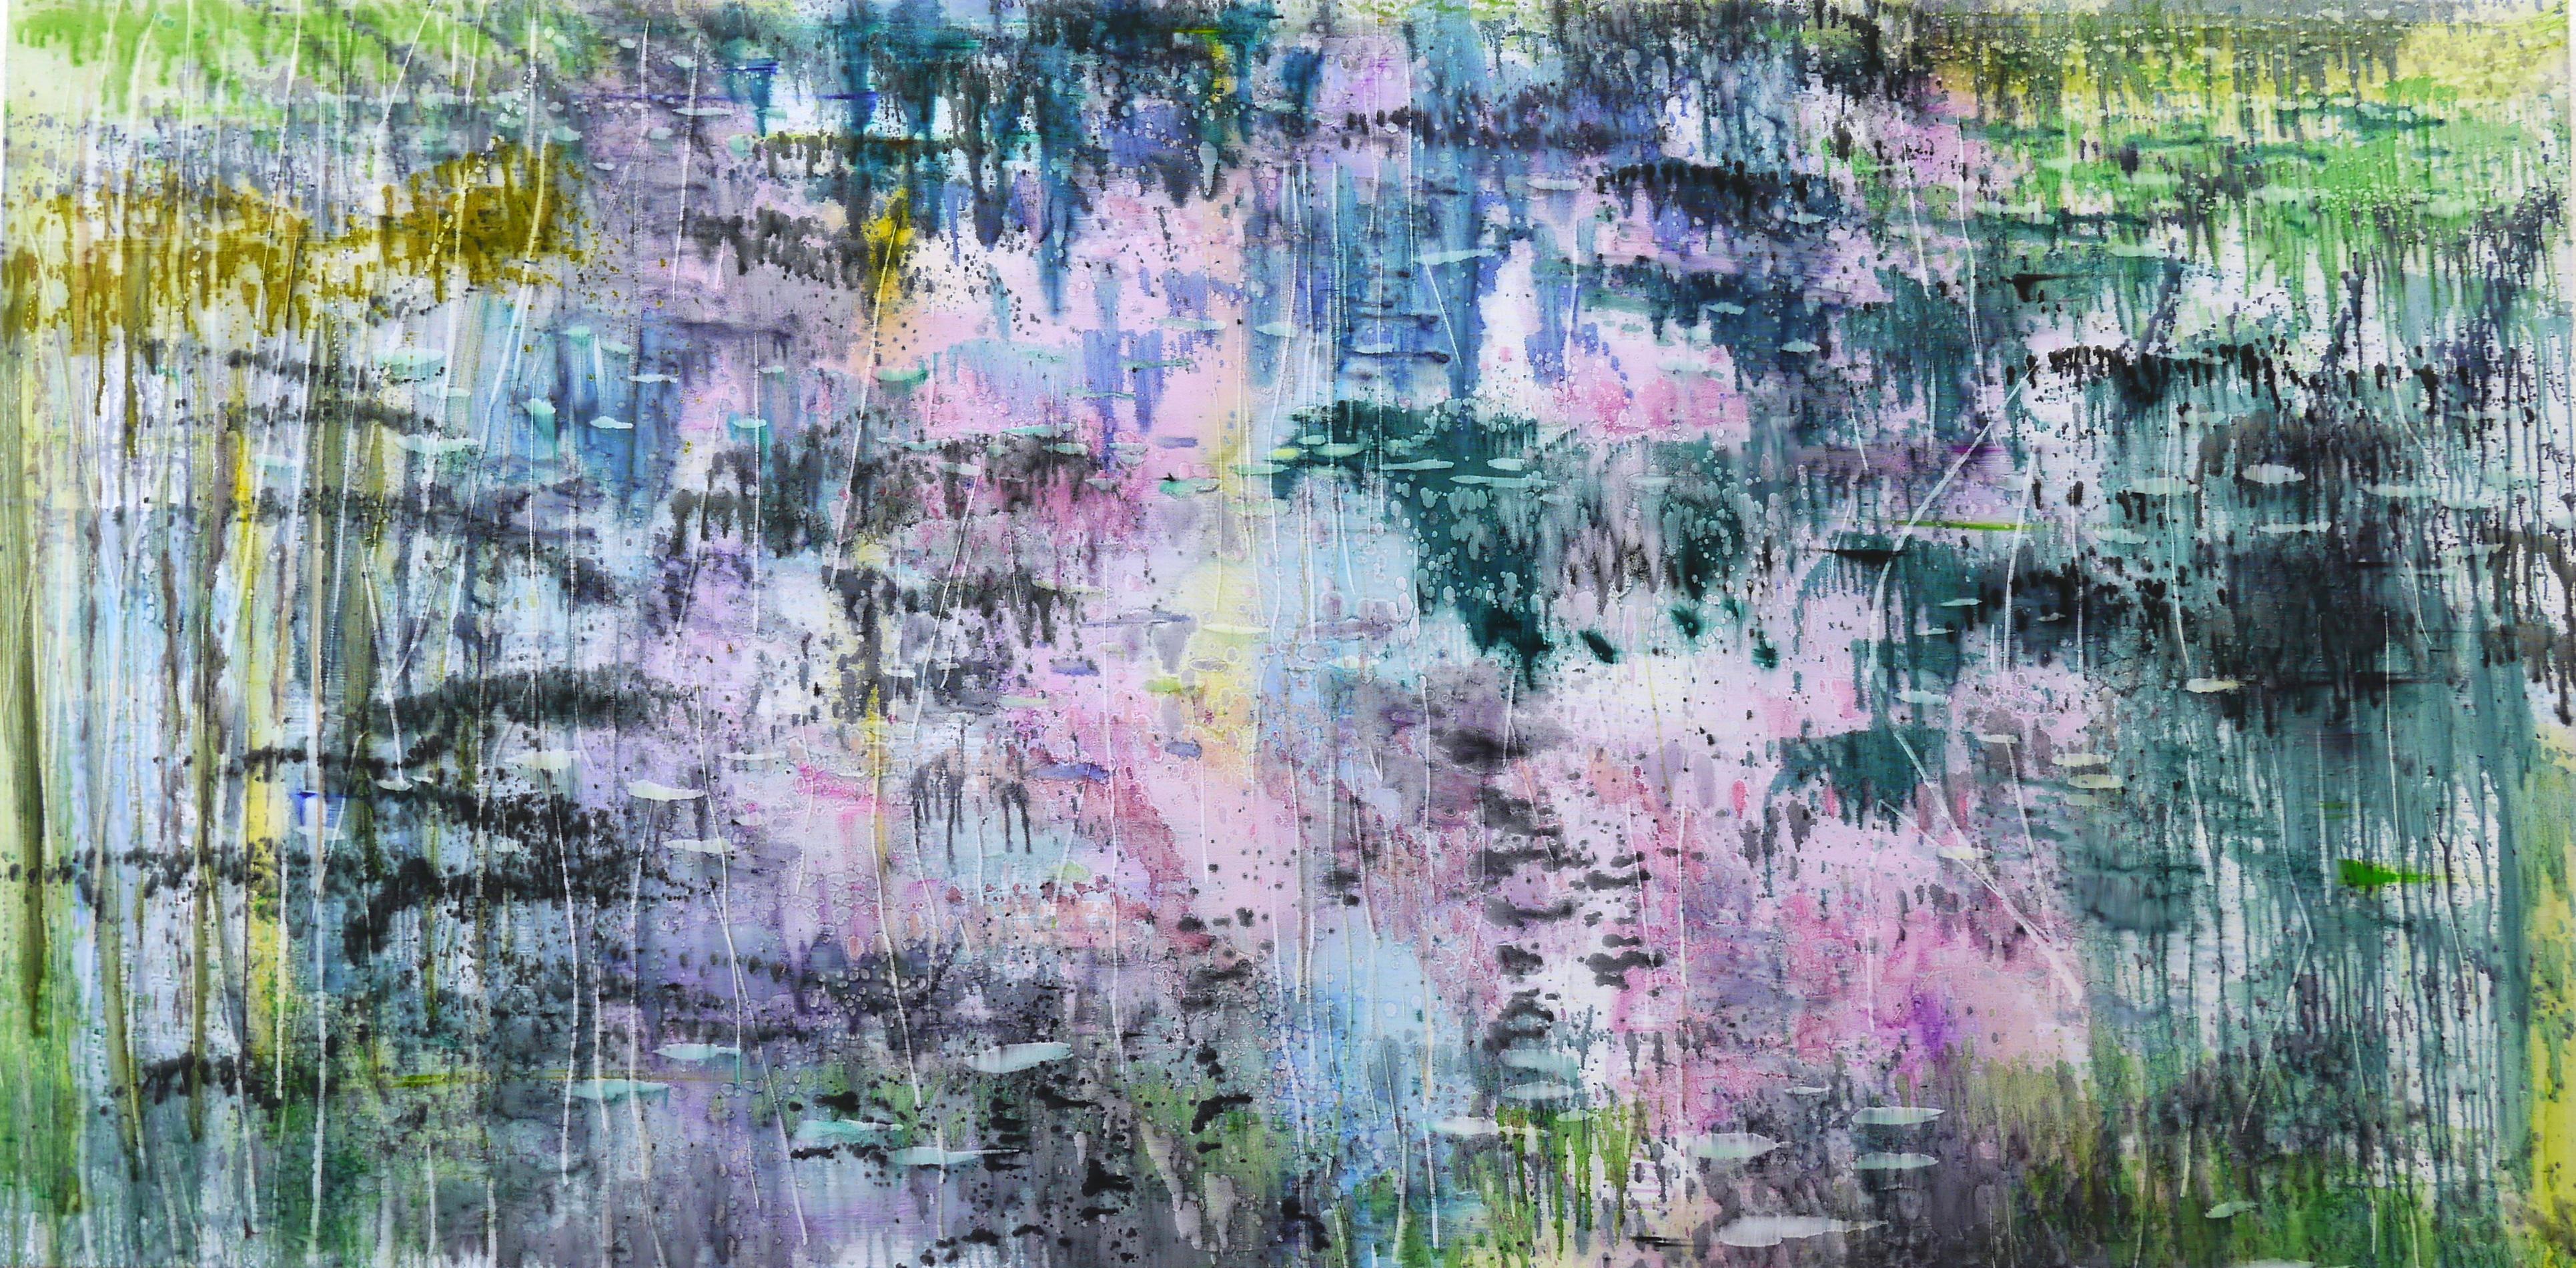 "Waldsee, " abstract painting of pond with water lilies, pink, blue, green - Painting by Matthias Meyer